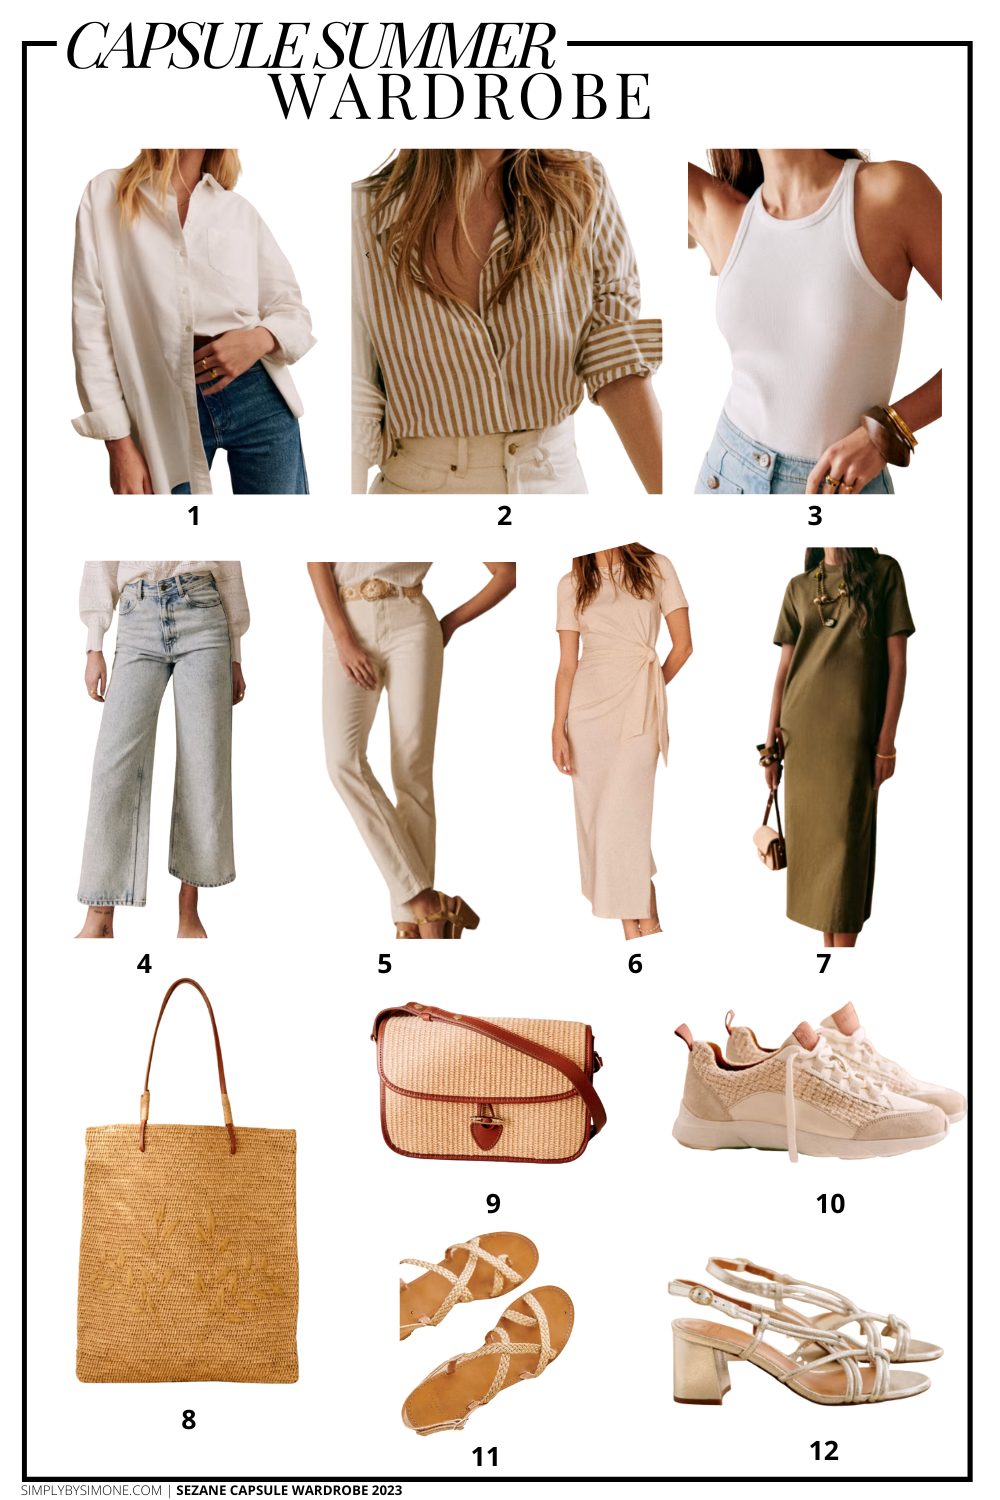 Affordable Sezane Summer Capsule Wardrobe | 12 Pieces, 48 Outfits | How to Build a Capsule Wardrobe | Sezane Summer Clothes | Outfit Inspiration | 48 Summer Weather Outfit Ideas | Summer Vacation Packing Guide | Sezane Summer Capsule Wardrobe - What To Wear This Summer 2023, Parisian Outfit Ideas | Items 1-12 | Simply by Simone